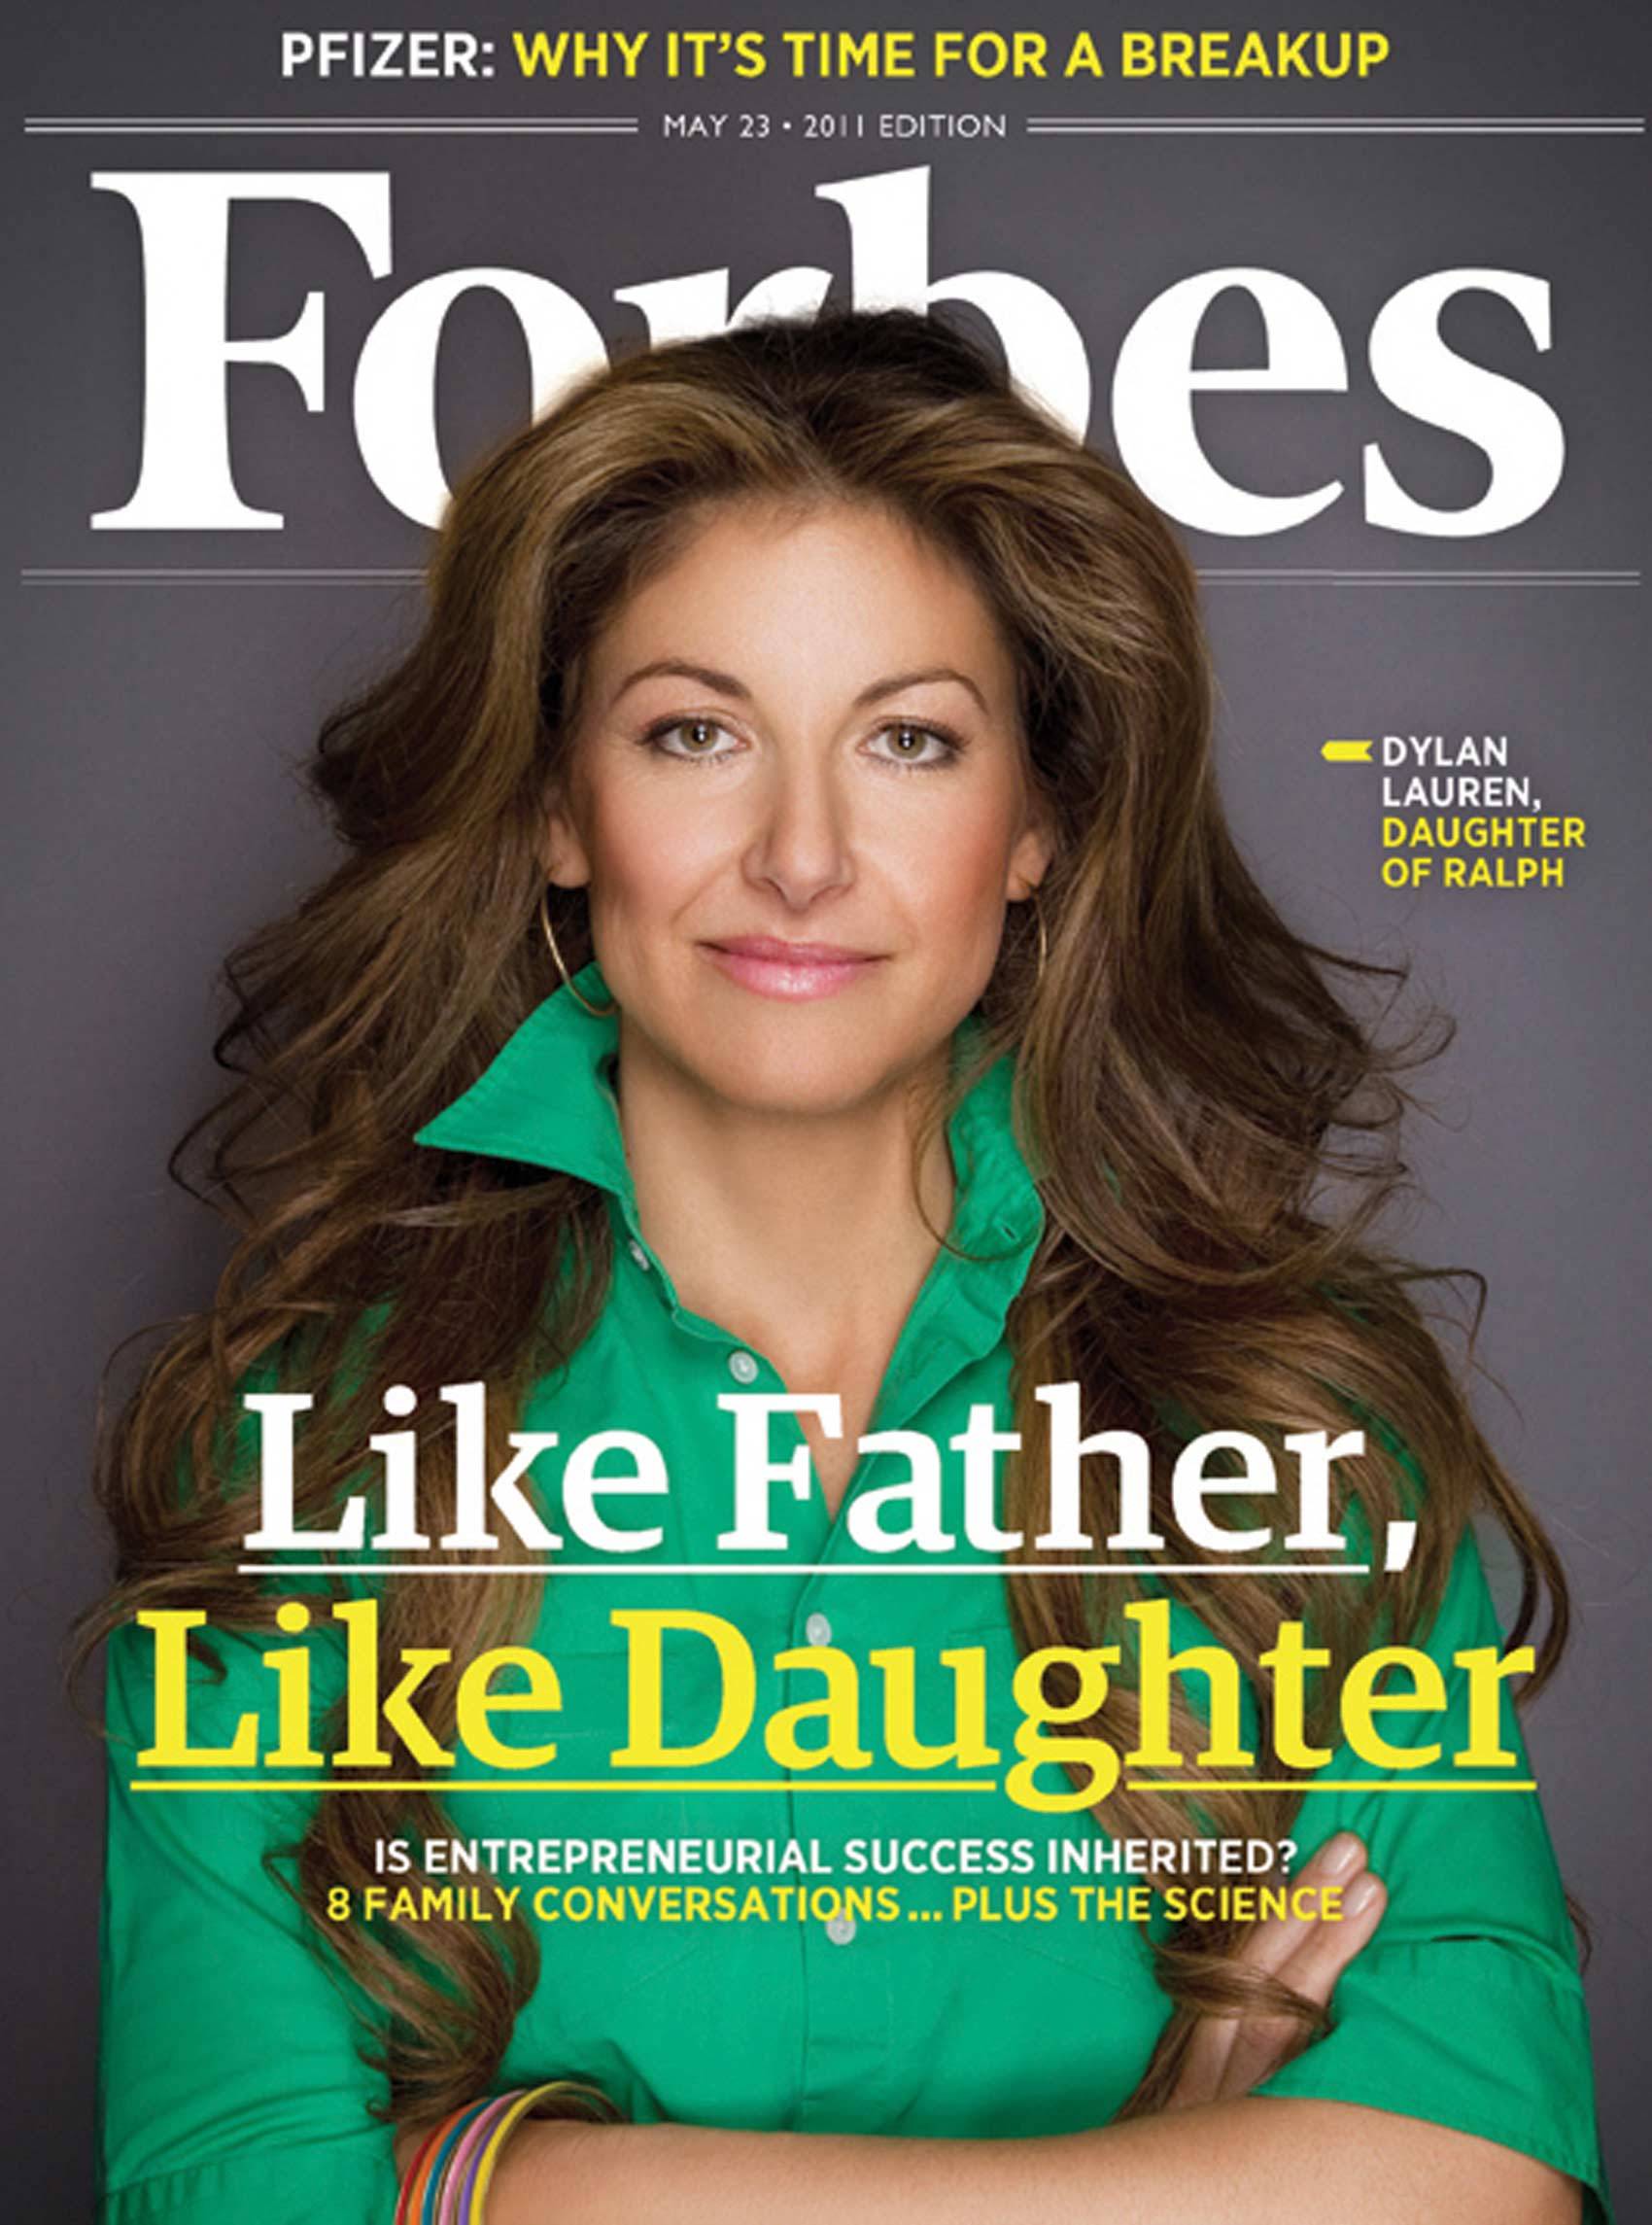 Forbes_cover052311-2.jpg